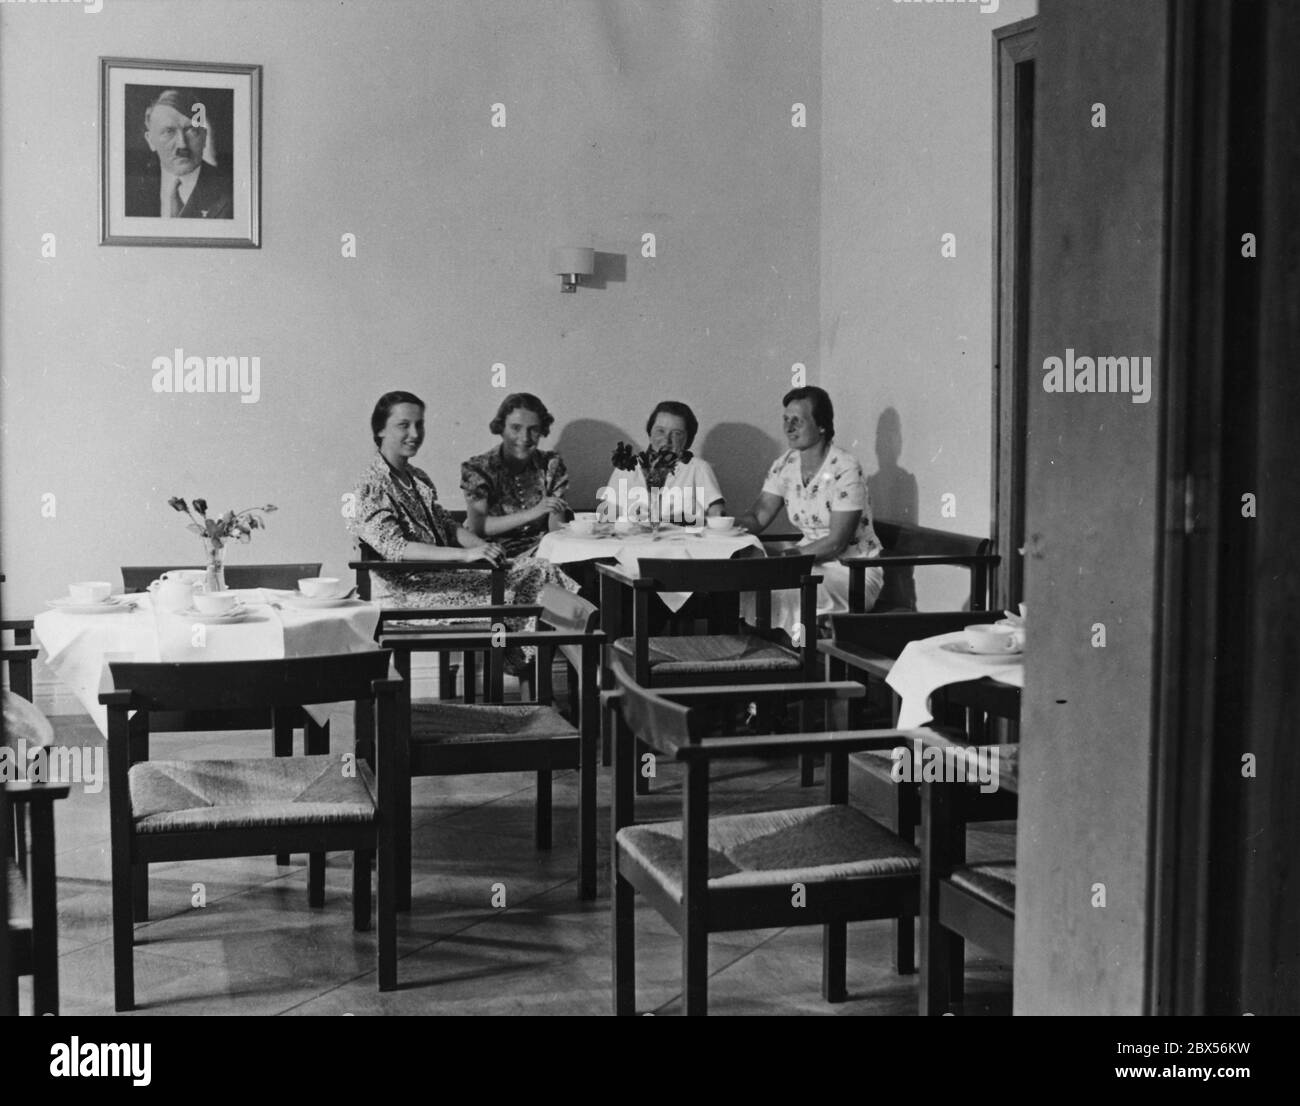 Students of the Labor Association of National Socialist Female Students (Arbeitsgemeinschaft nationalsozialistischer Studentinnen)  in the common room of their new dormitory in Berlin C, Oranienburgerstrasse 19. On the wall is a portrait of Adolf Hitler. Stock Photo